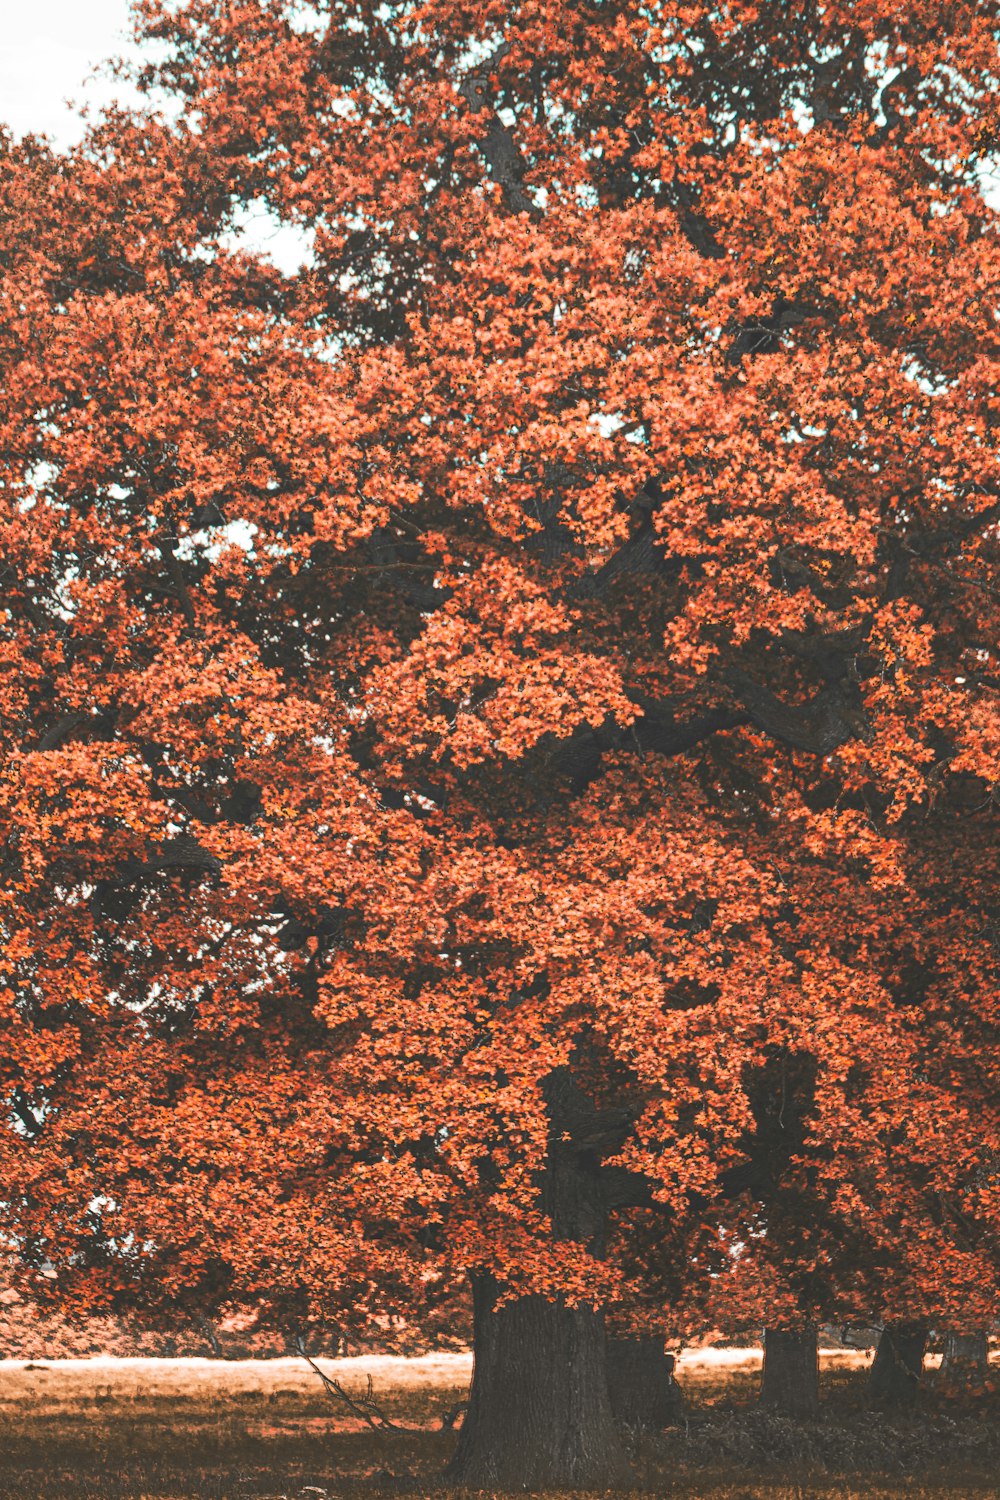 a large tree with red leaves in a park